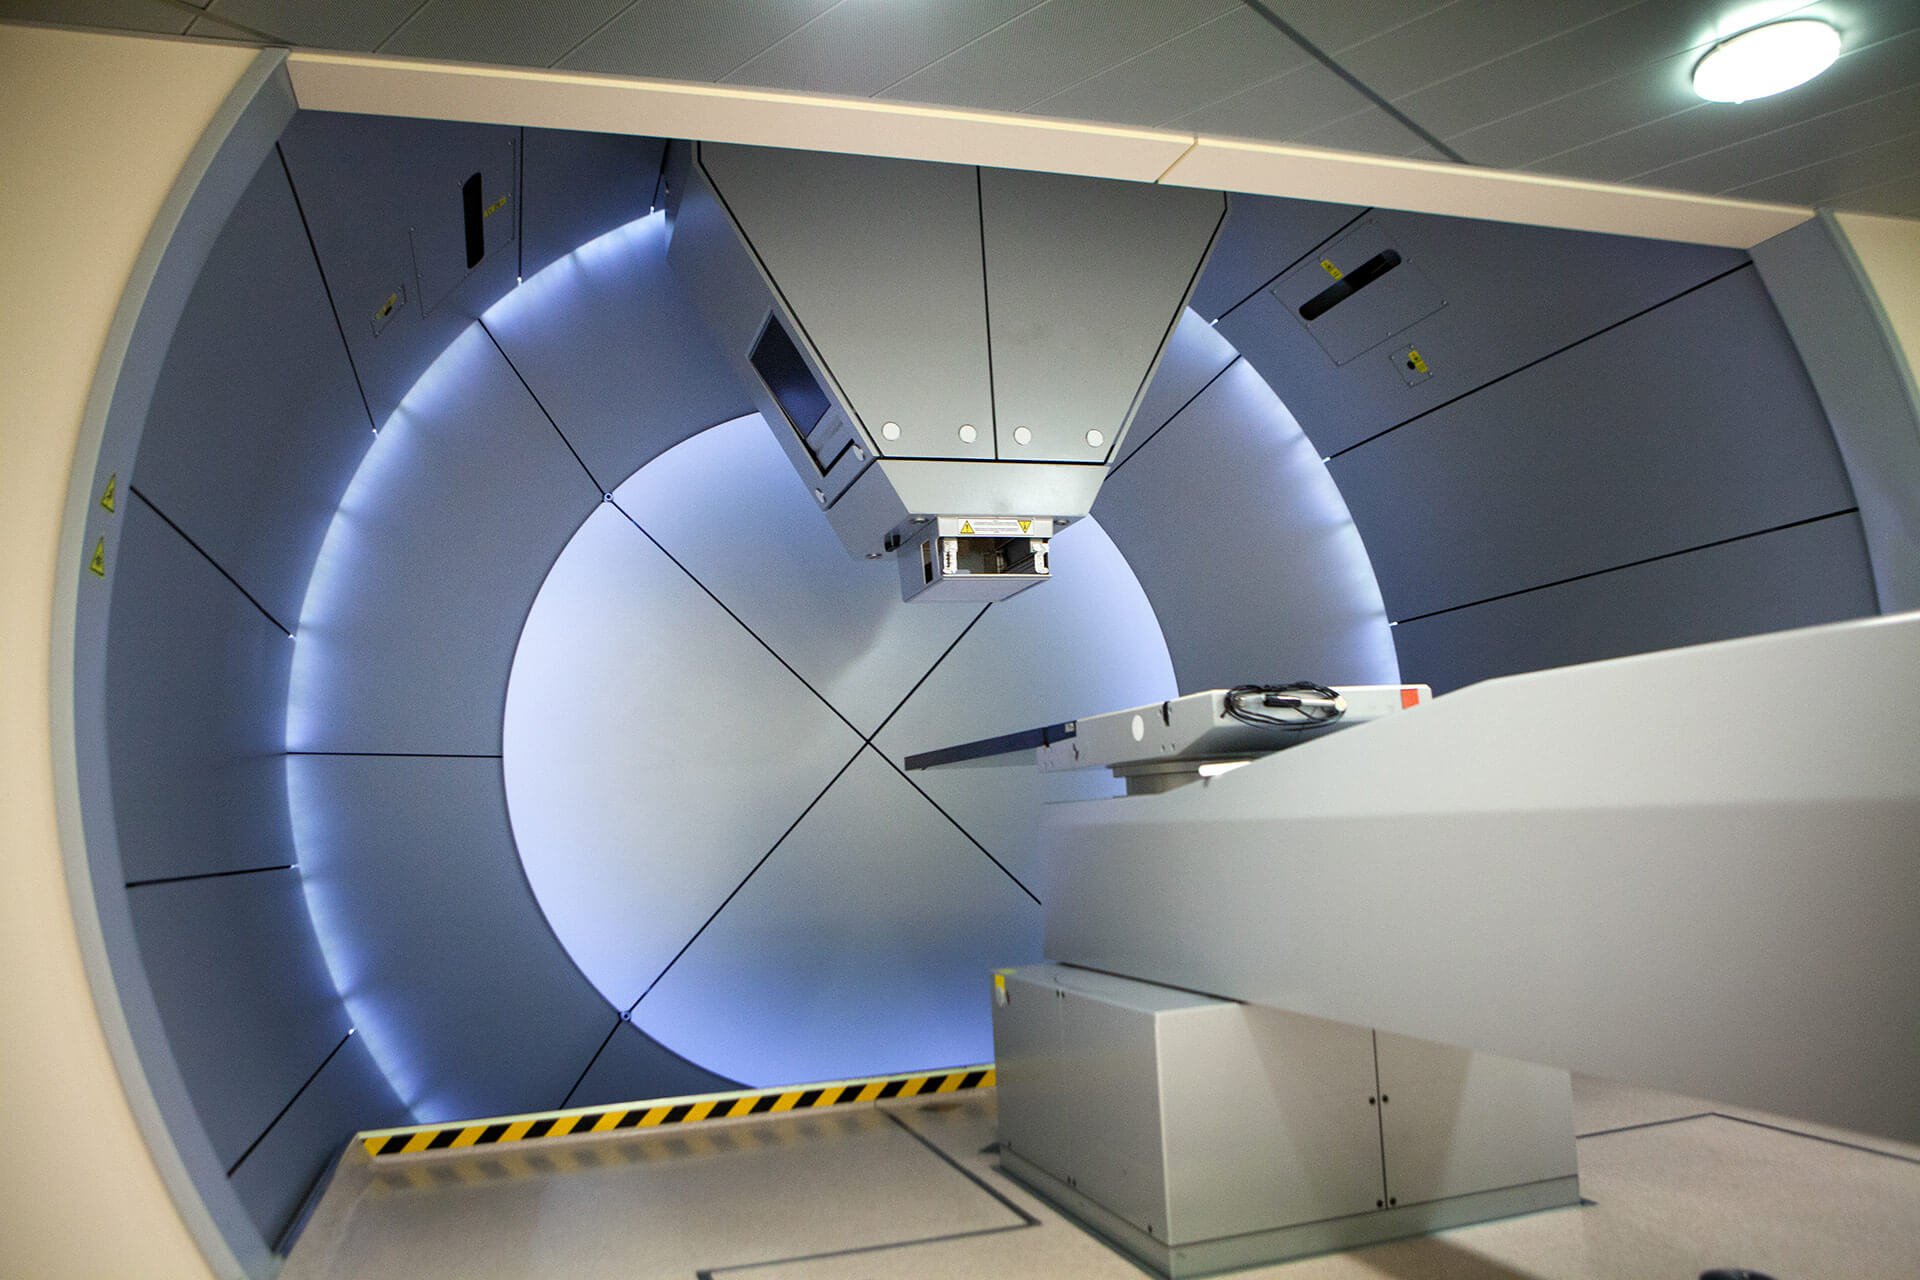 Proton therapy is a very specific type of radiotherapy and much more effective, precise and safe for certain cases of cancer